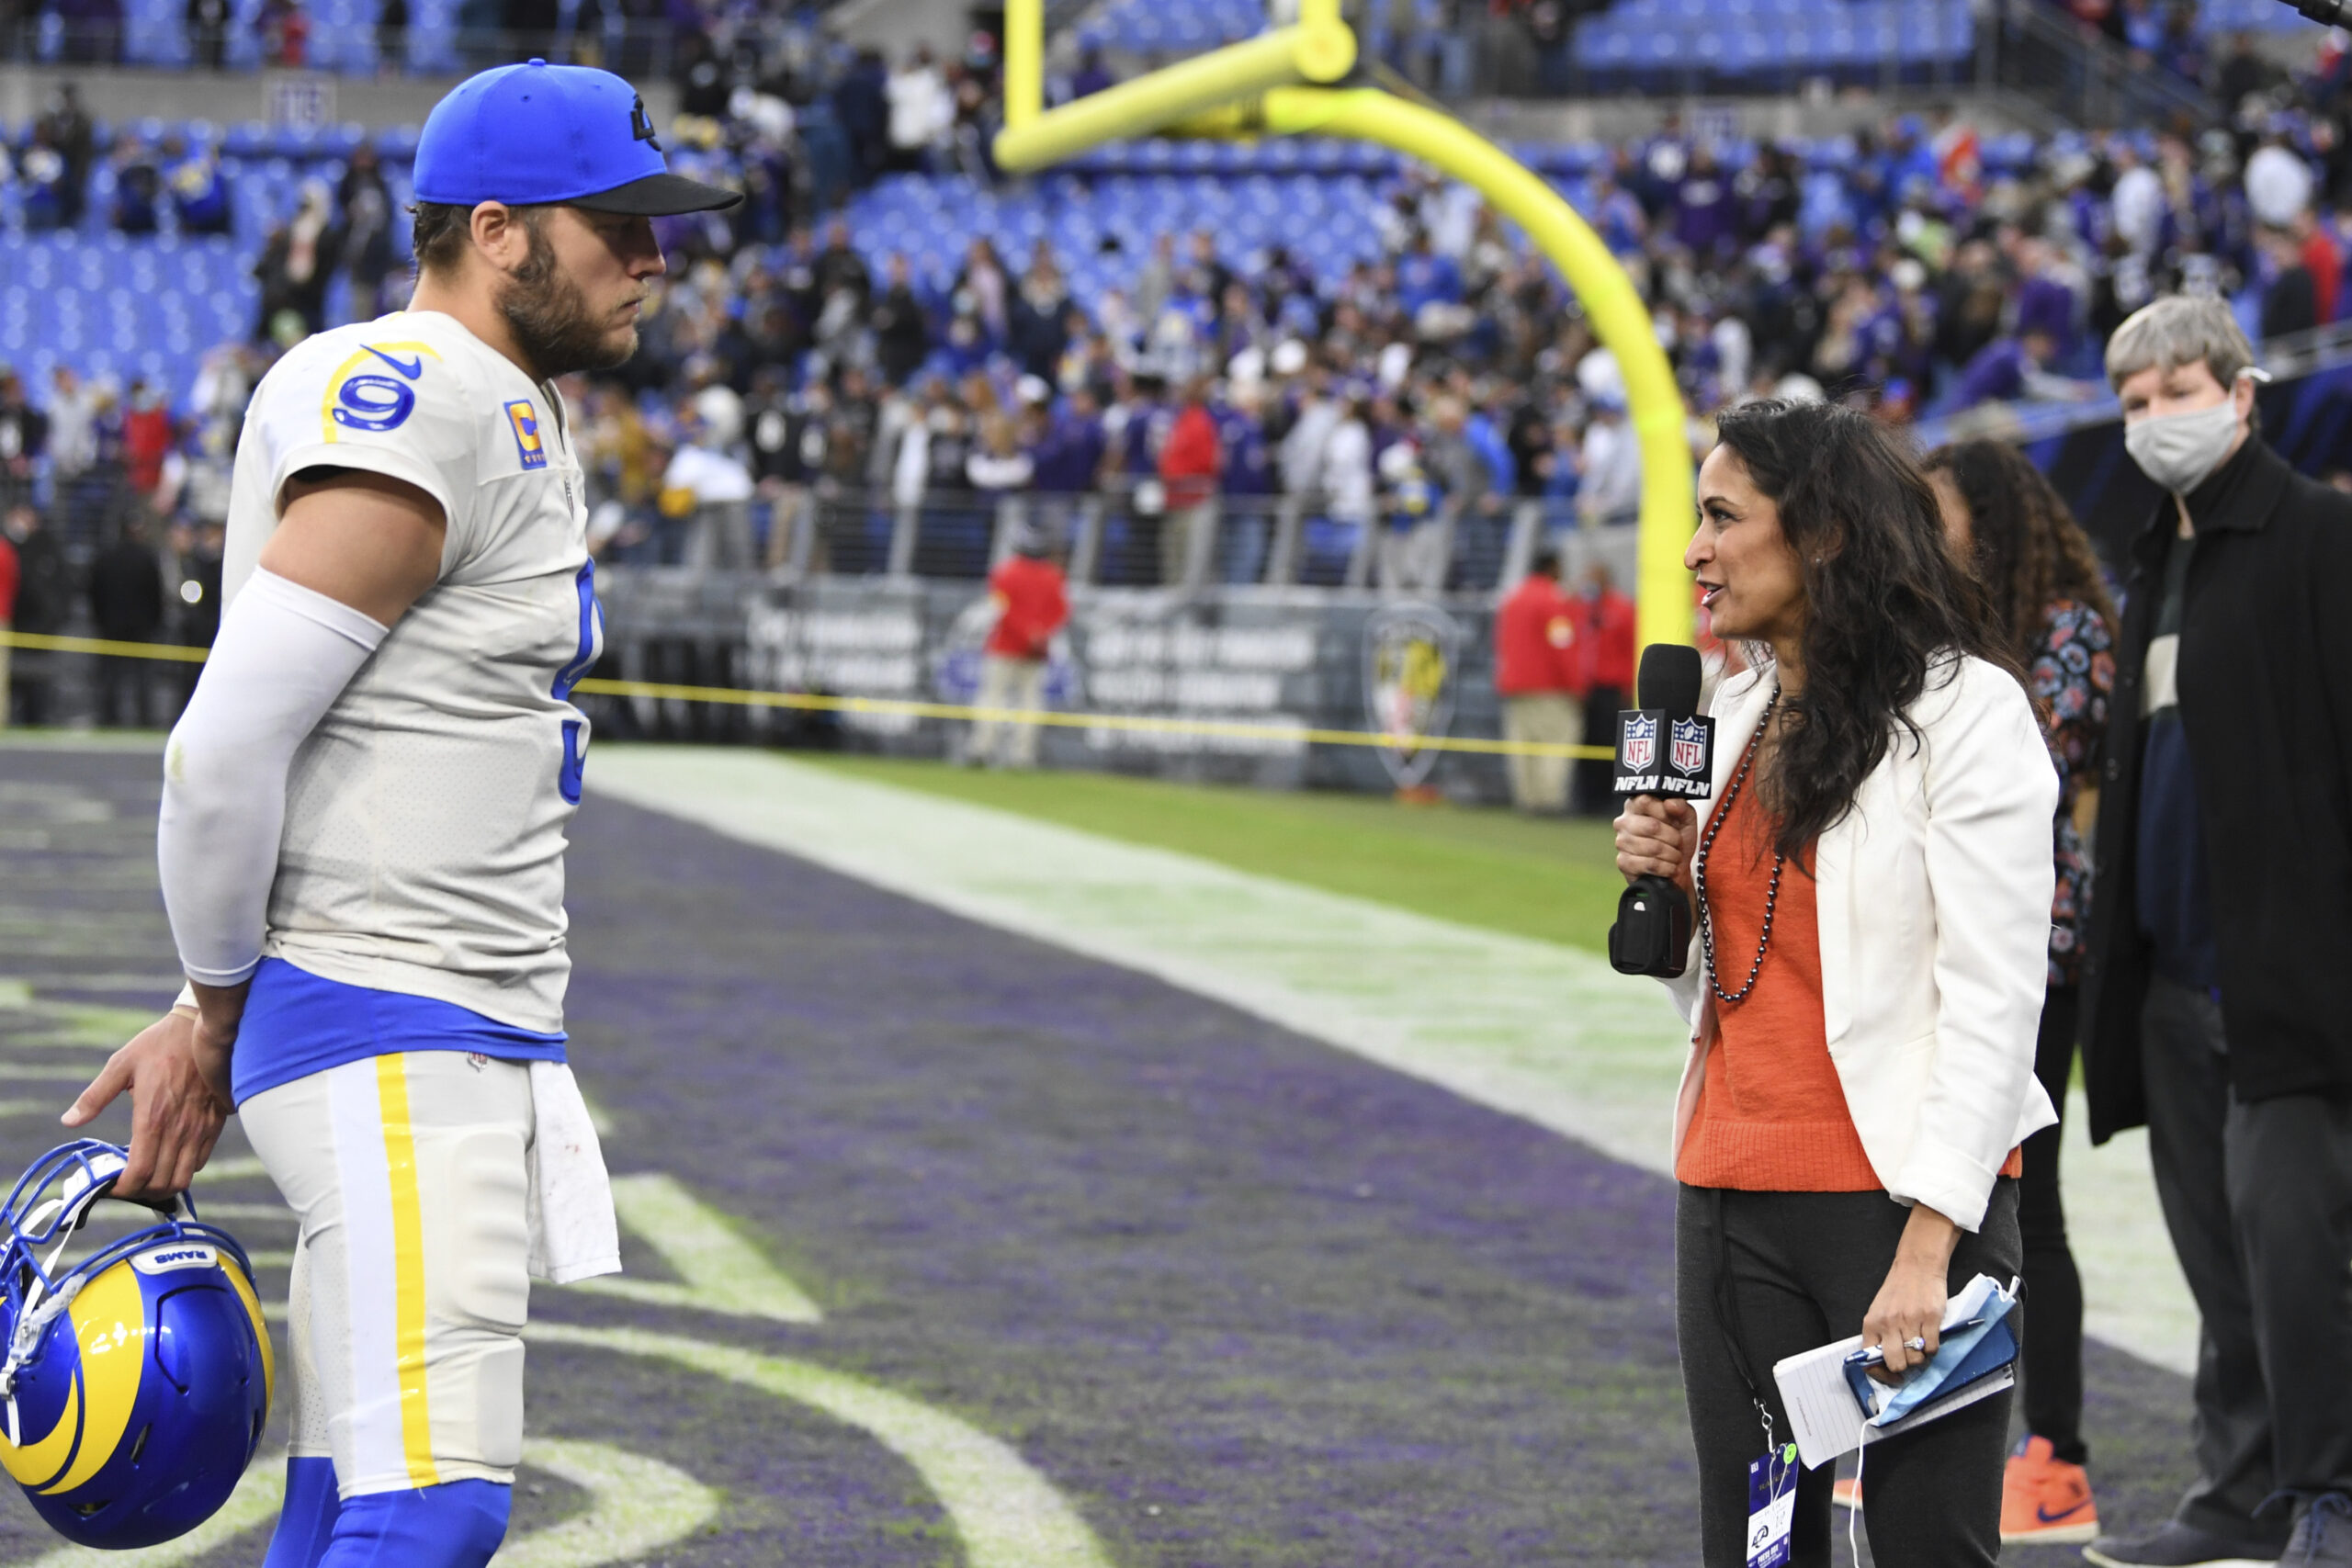 Reporter interviews football player on the sidelines